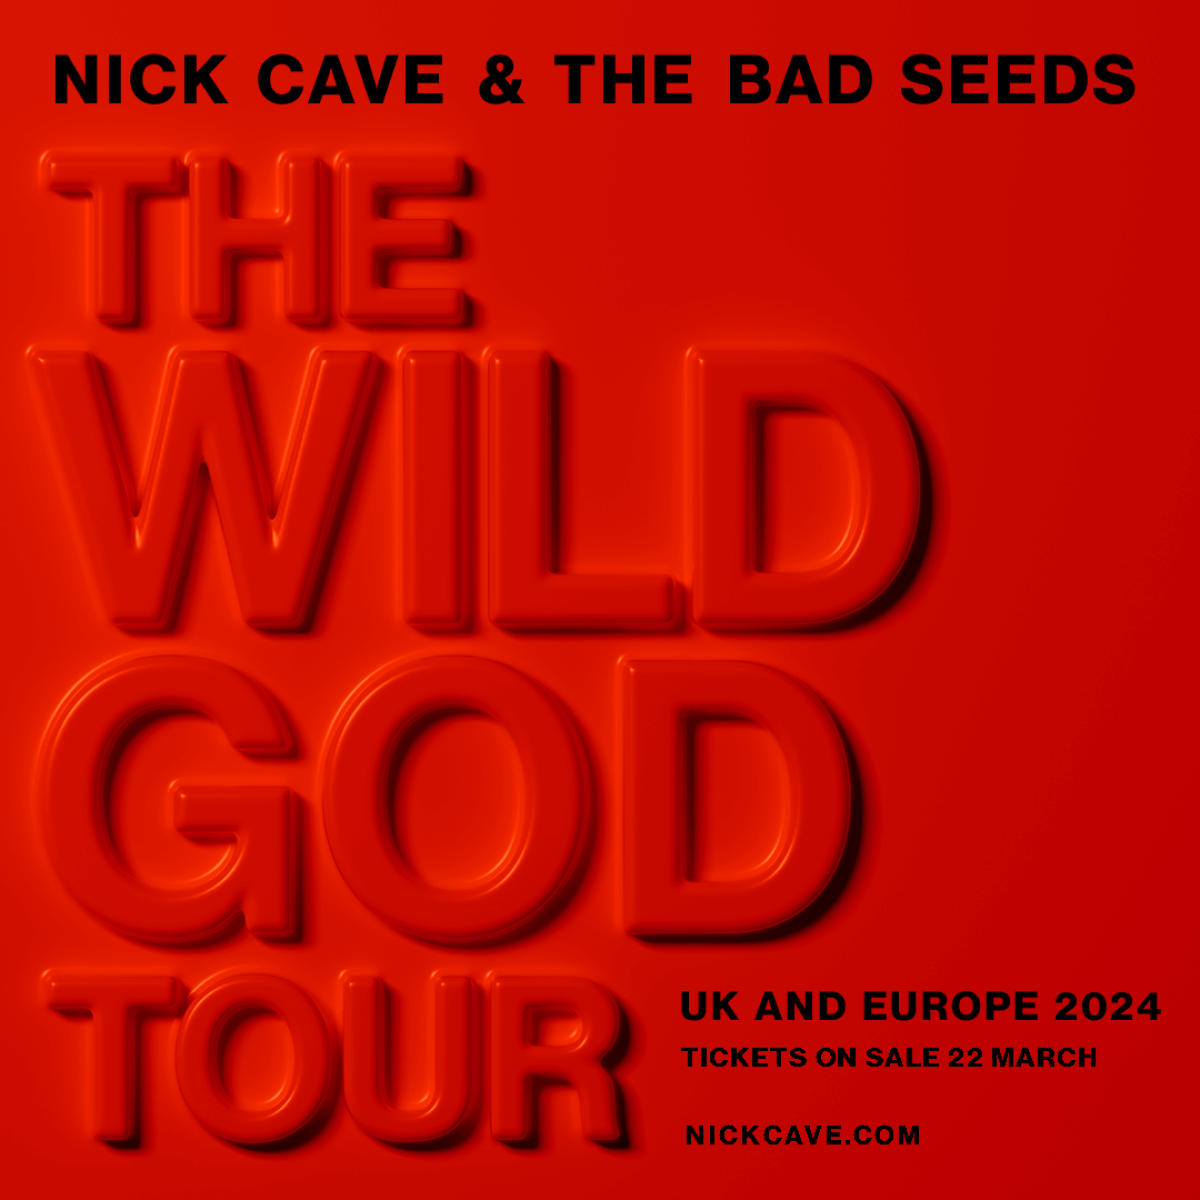 Nick Cave and the Bad Seeds - The Wild God Tour in der Rudolf Weber-Arena Tickets